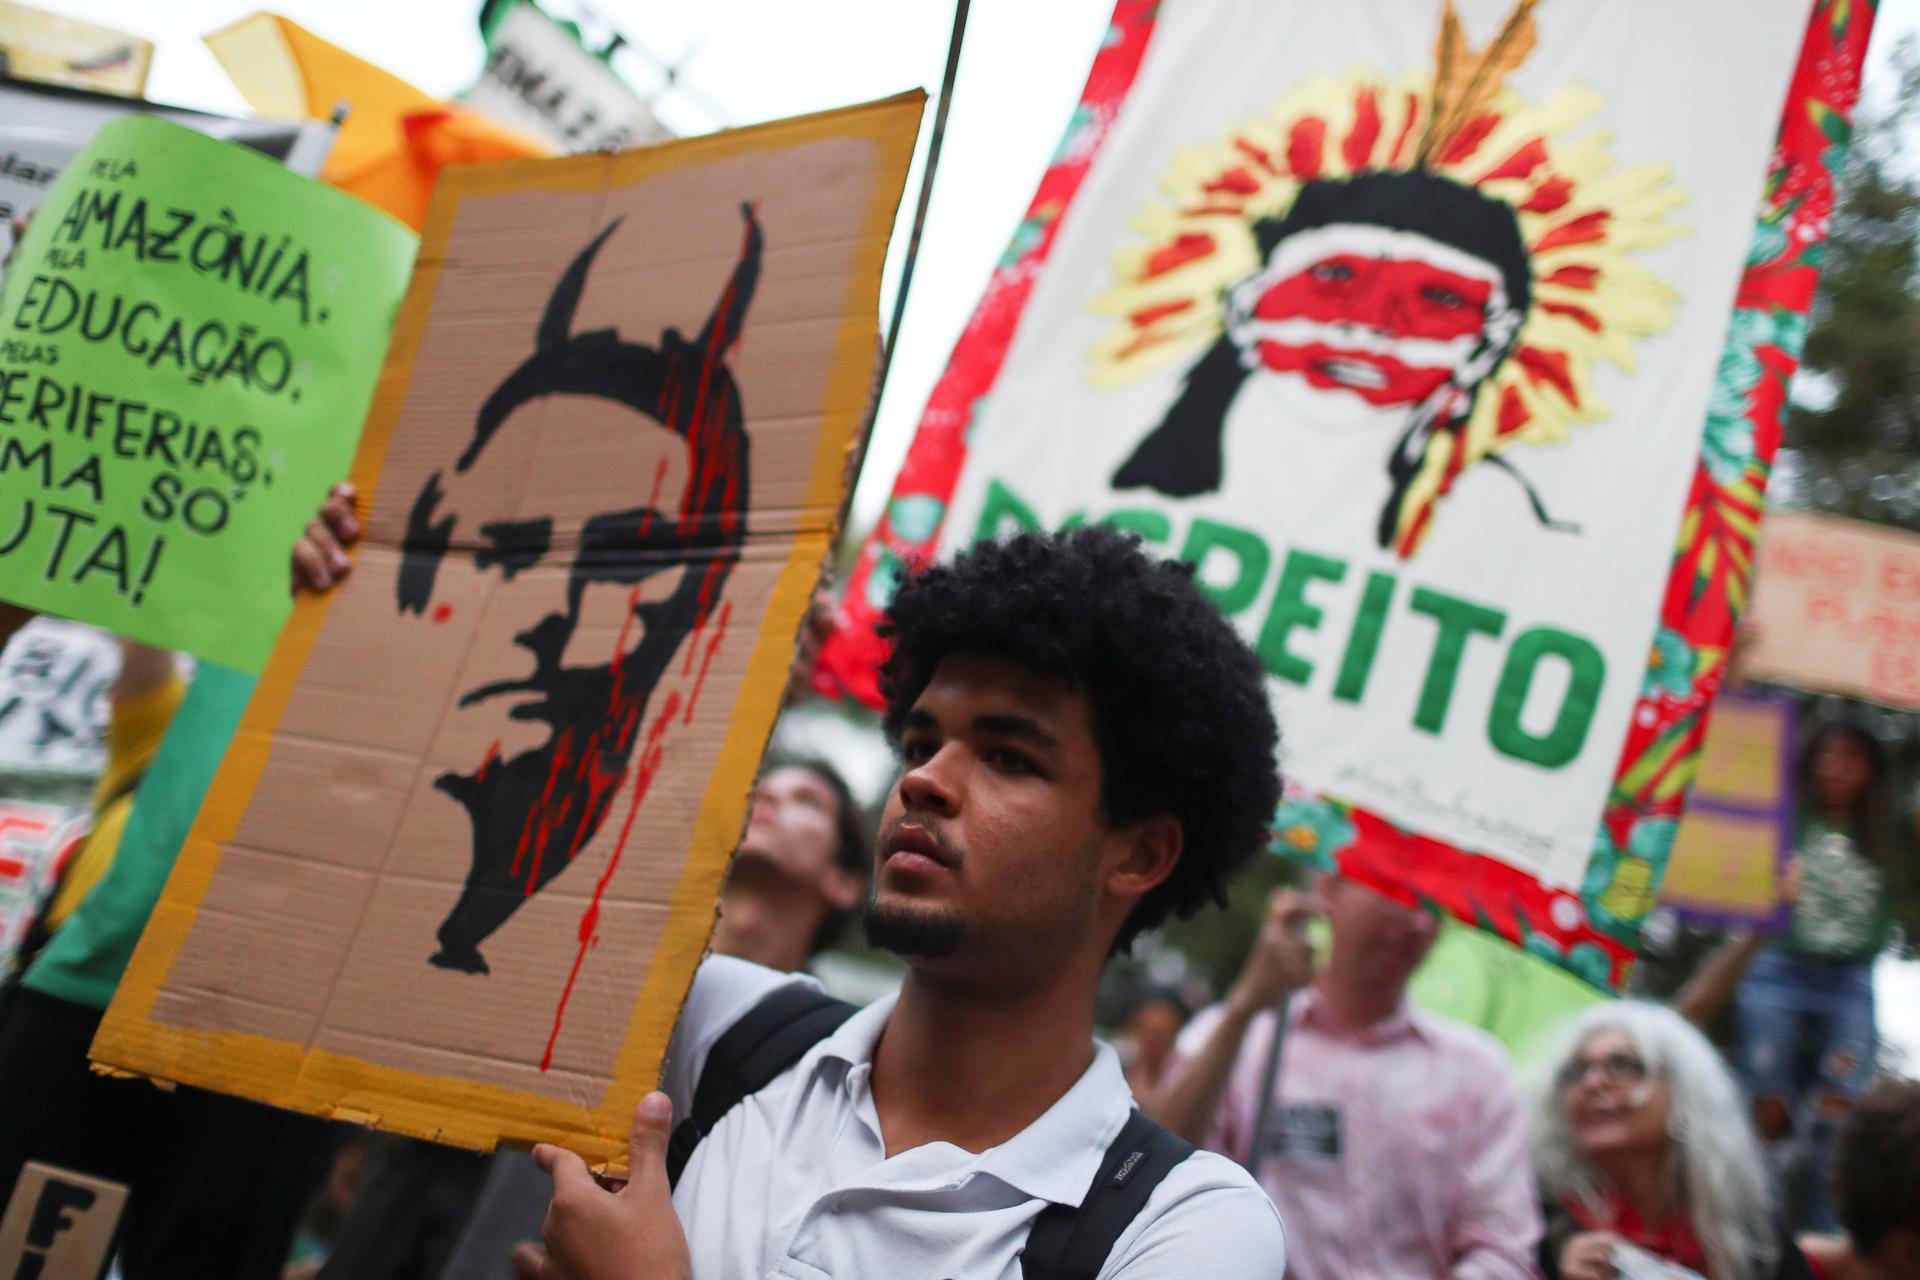 A person holds a placard with a drawing depicting Brazil's President Bolsonaro with horns during a Global Climate Strike rally in Rio de Janeiro